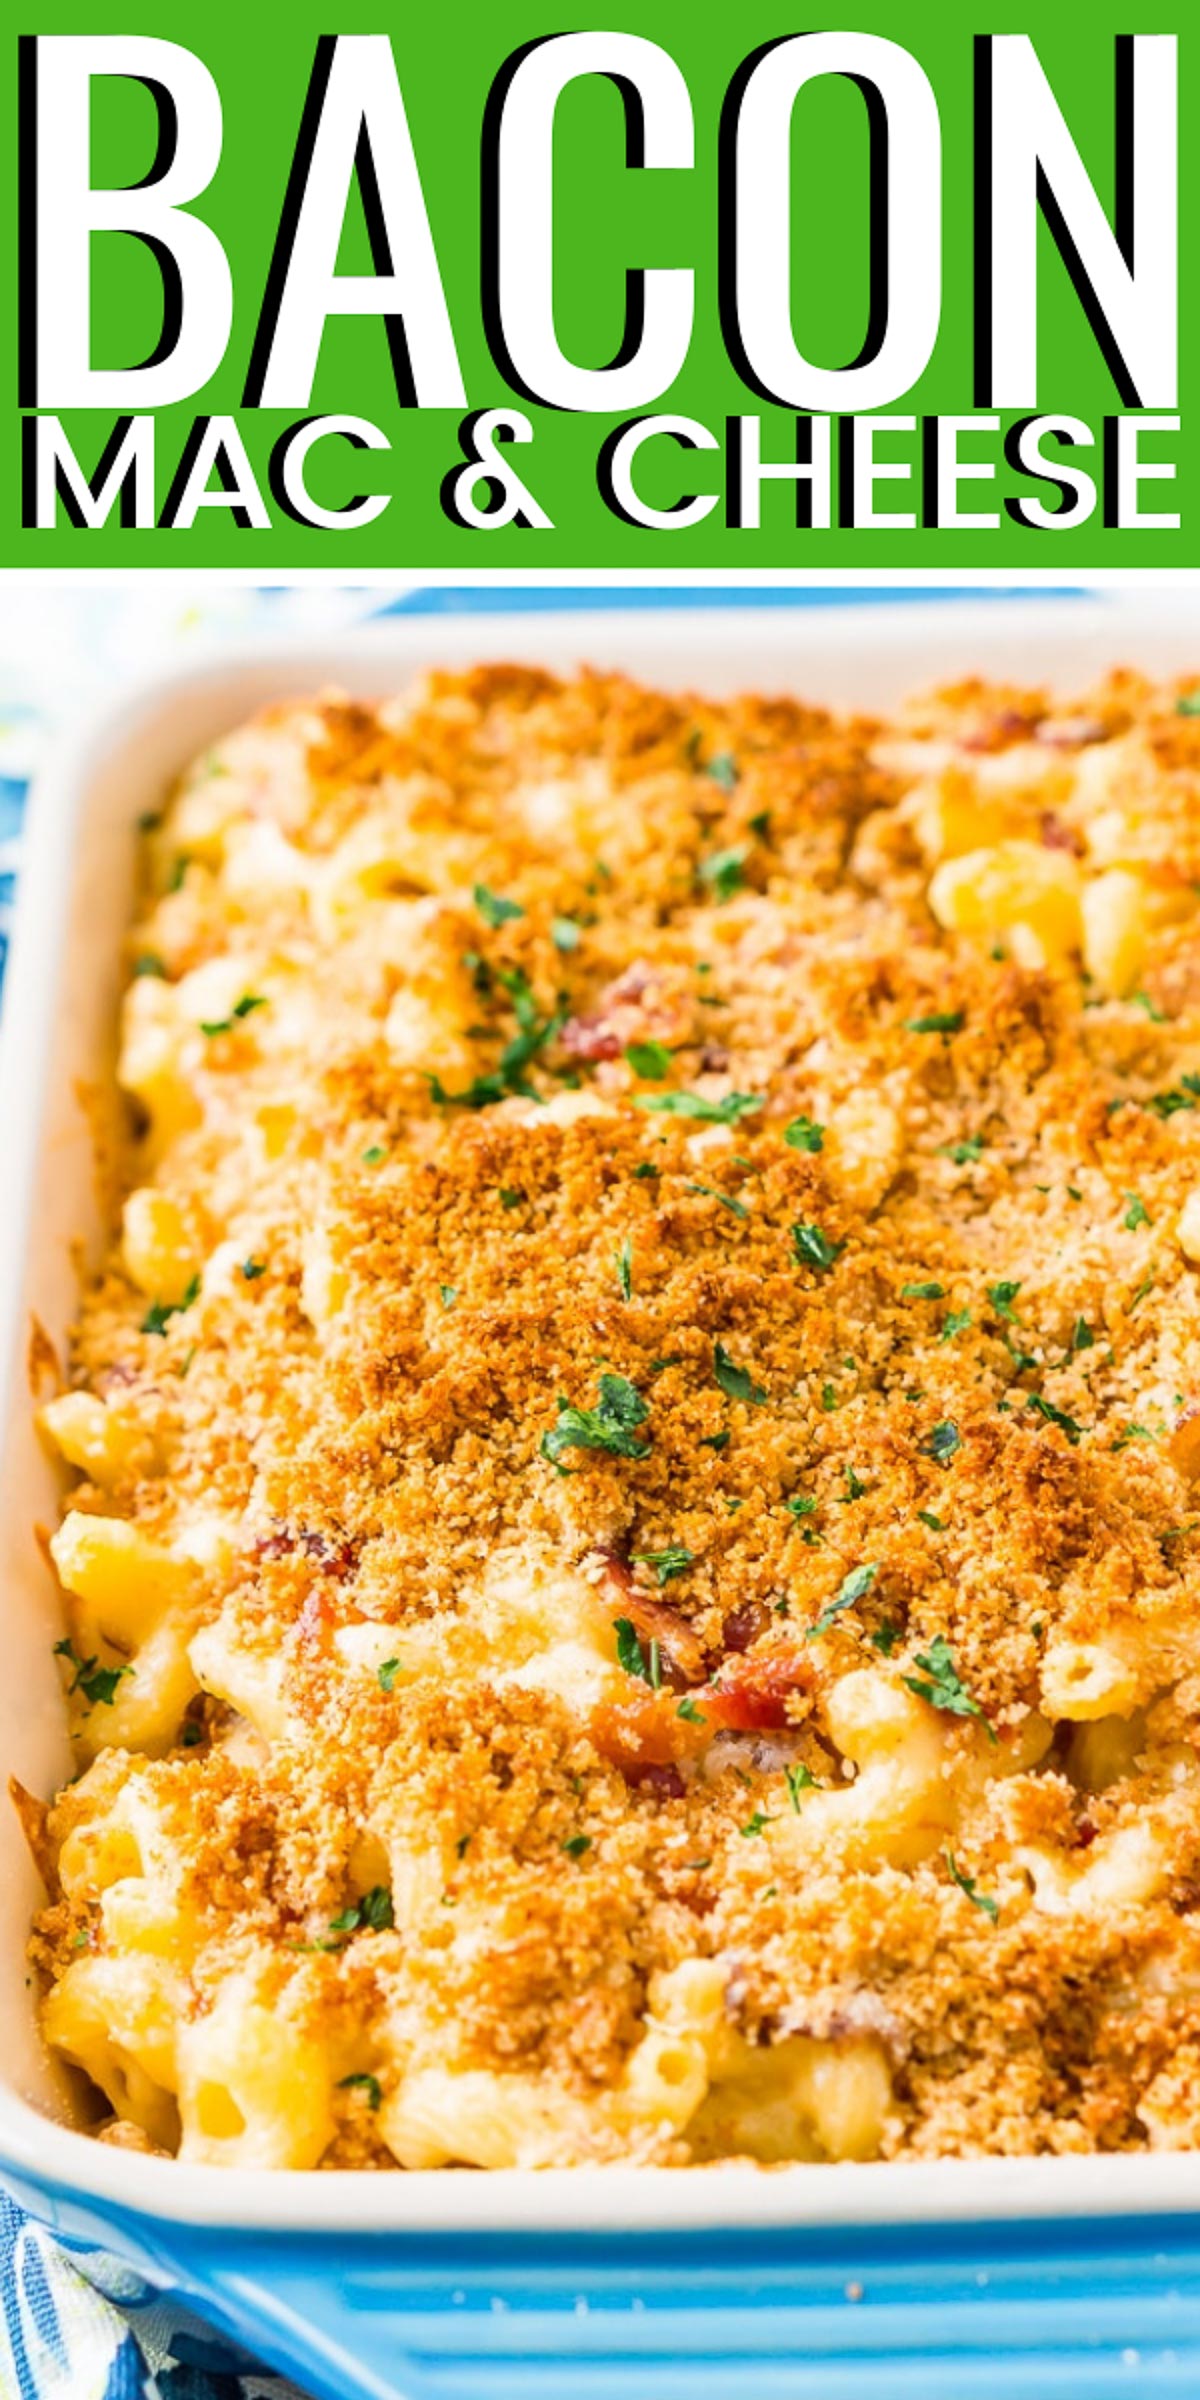 This Three Cheese Bacon Mac and Cheese is loaded up with crispy baked bacon and three different kinds of cheese - Parmesan, Mozzarella, and Cheddar Cheese - it's to die for! via @sugarandsoulco